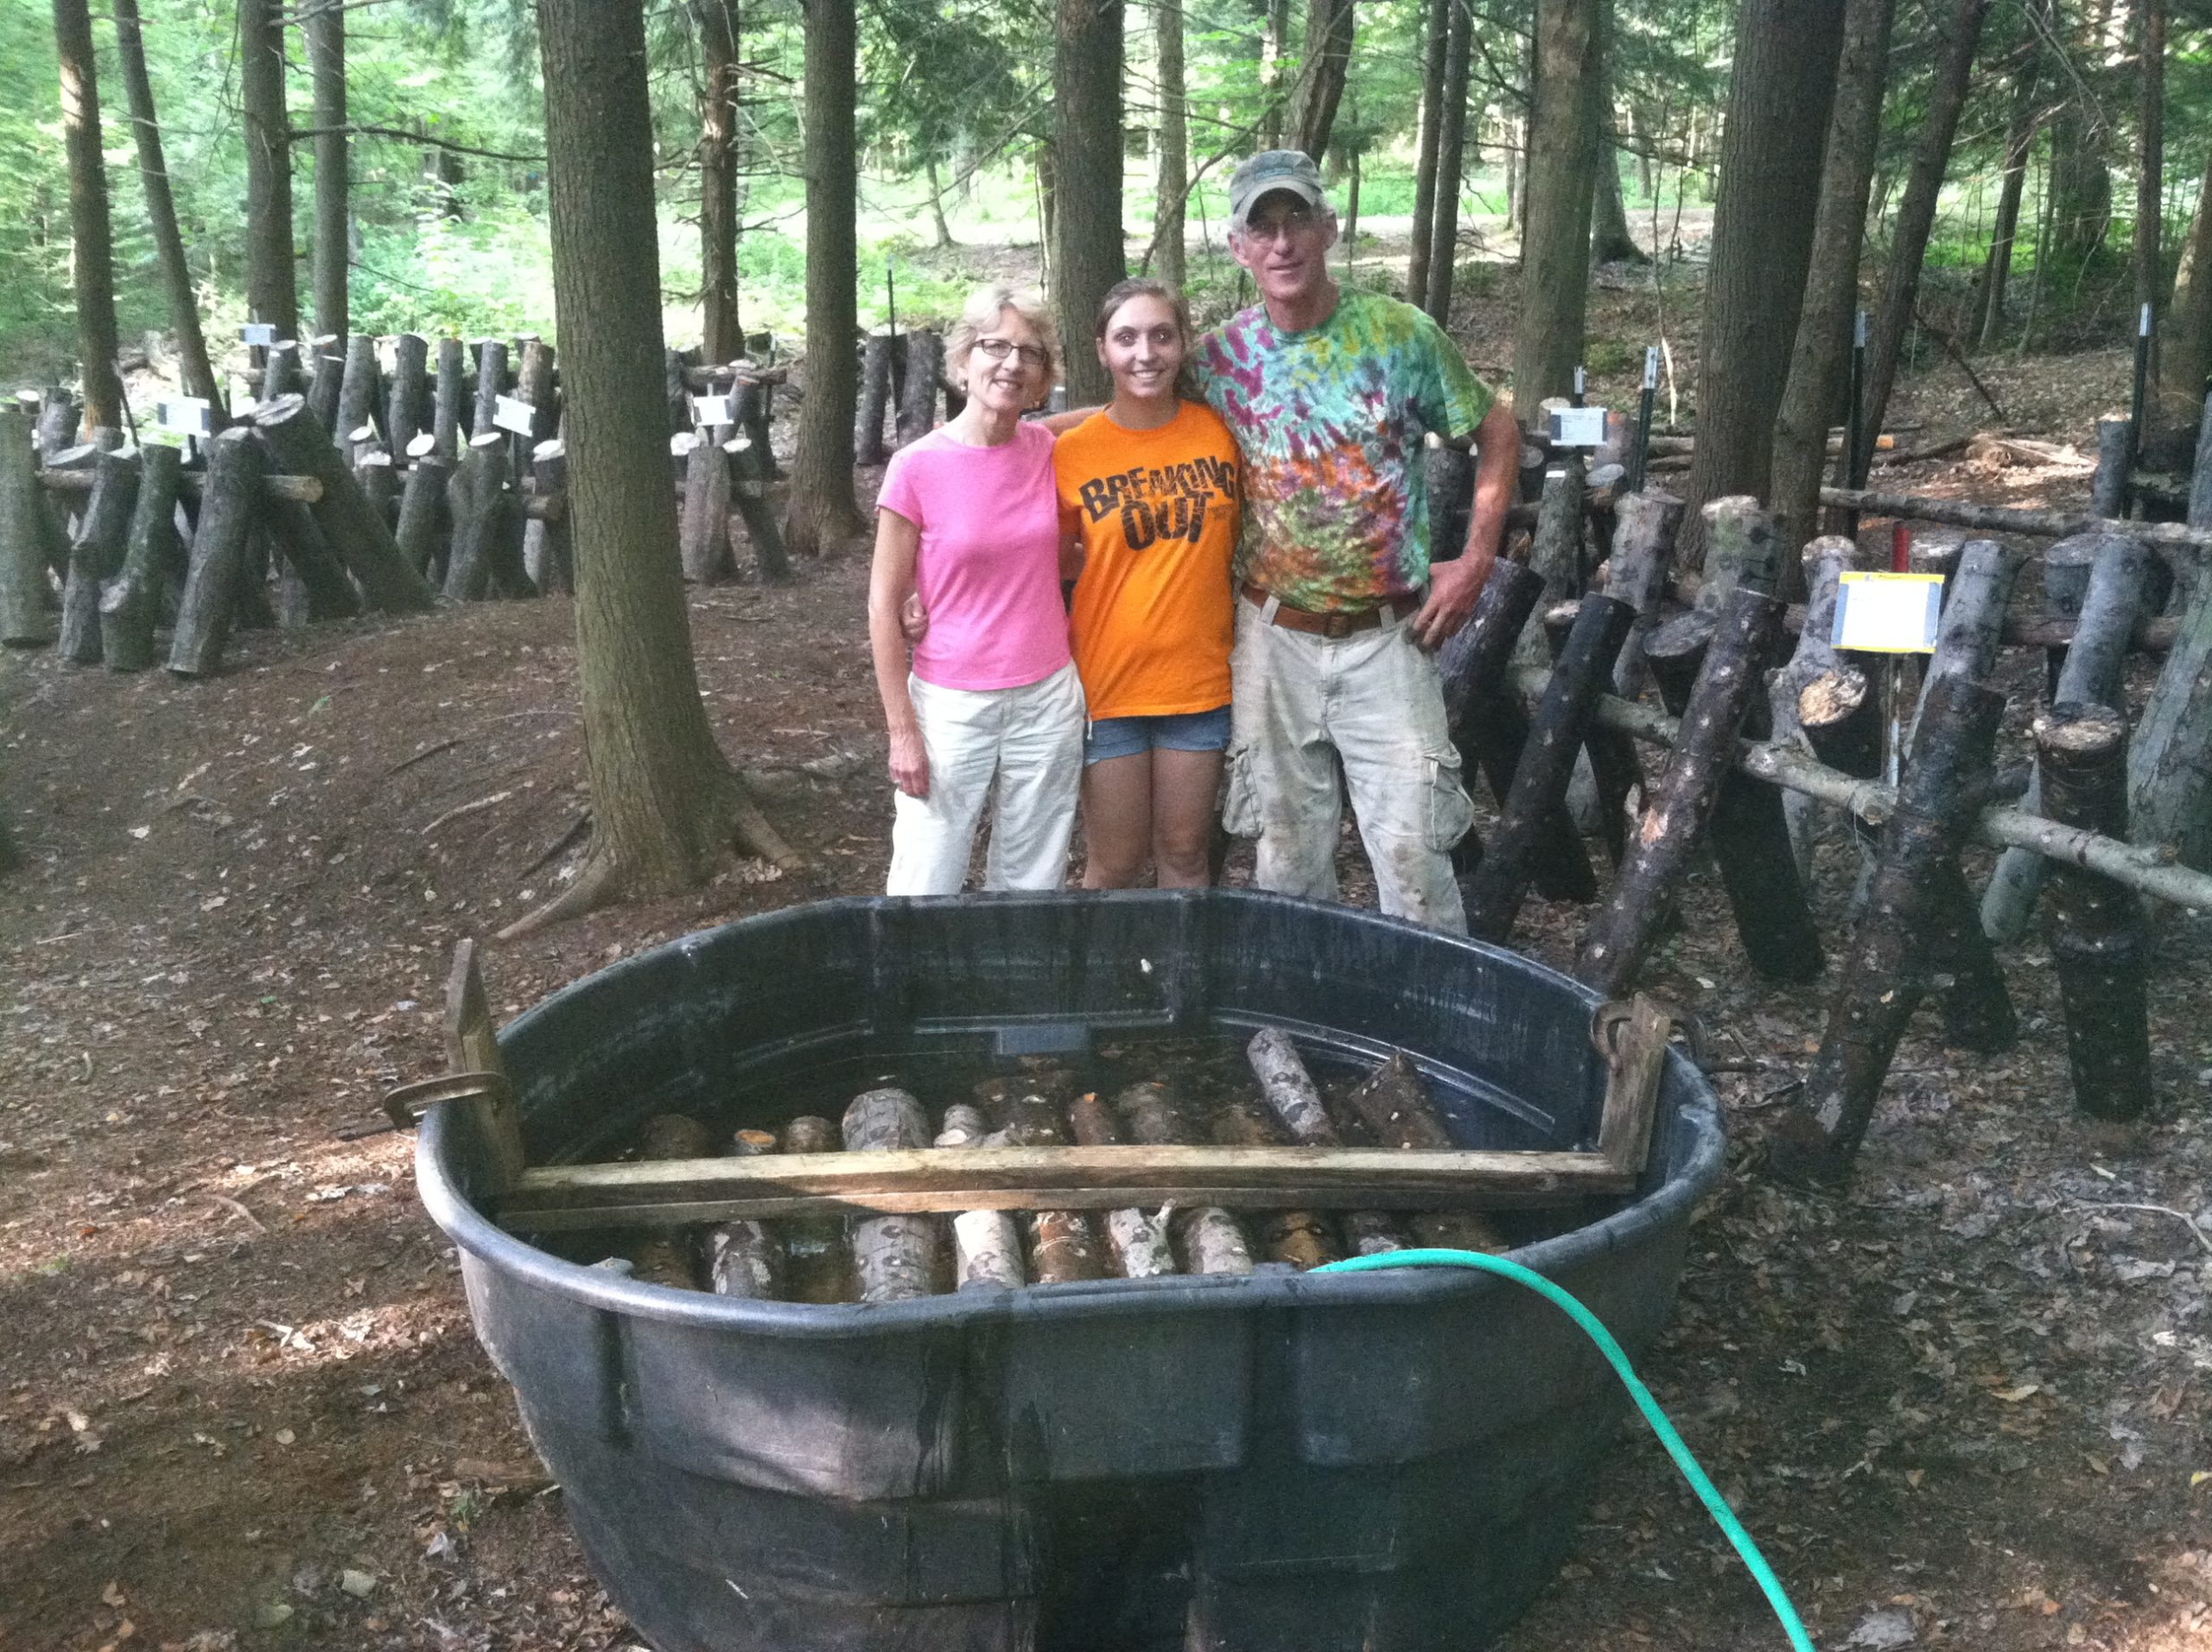 Three people stand with a large tub in front of them, filled with water and soaking logs.